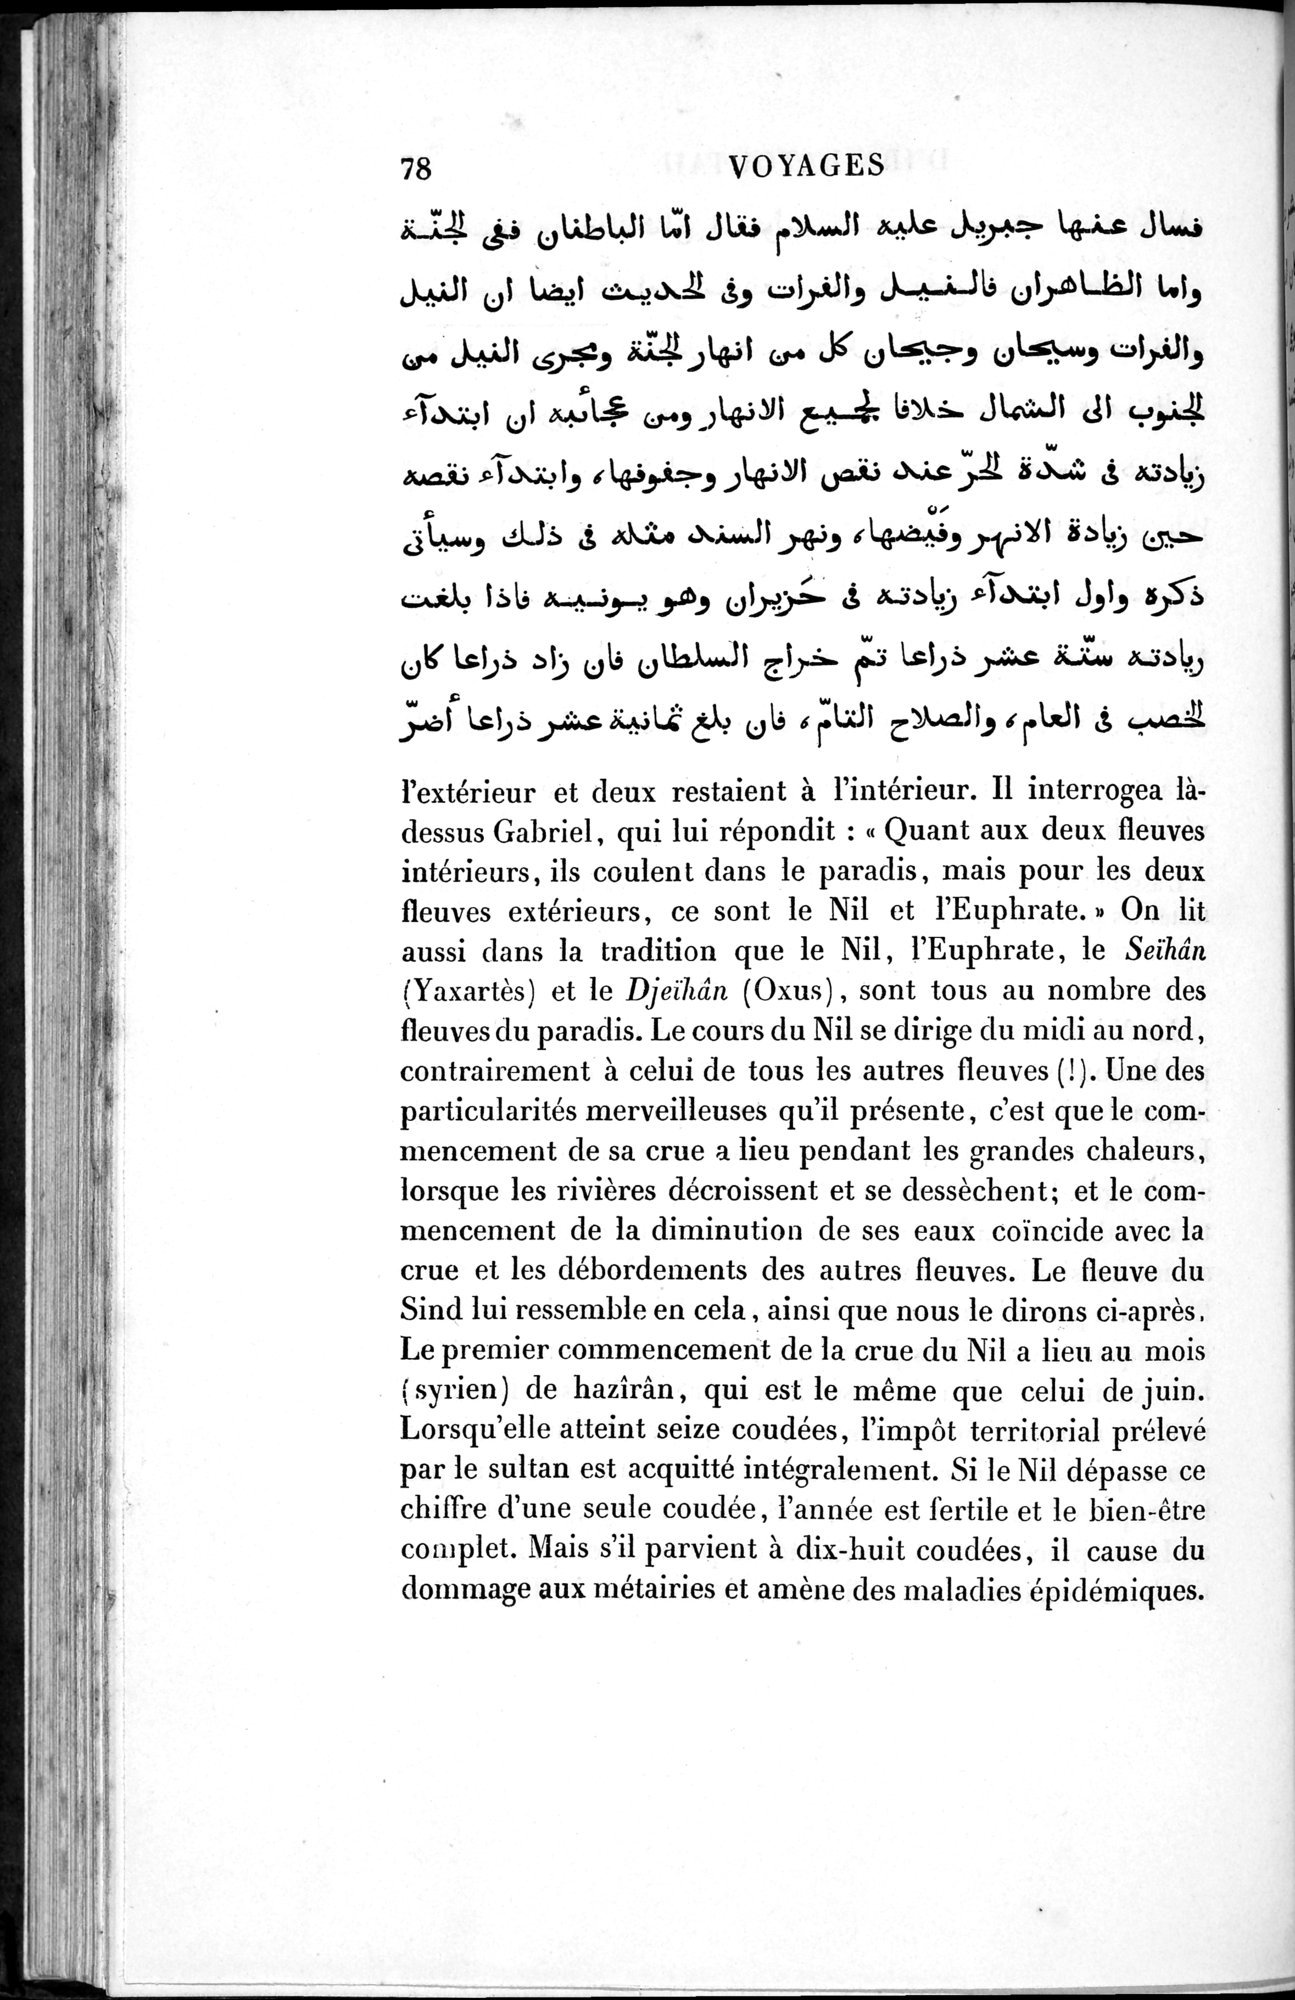 Voyages d'Ibn Batoutah : vol.1 / Page 138 (Grayscale High Resolution Image)